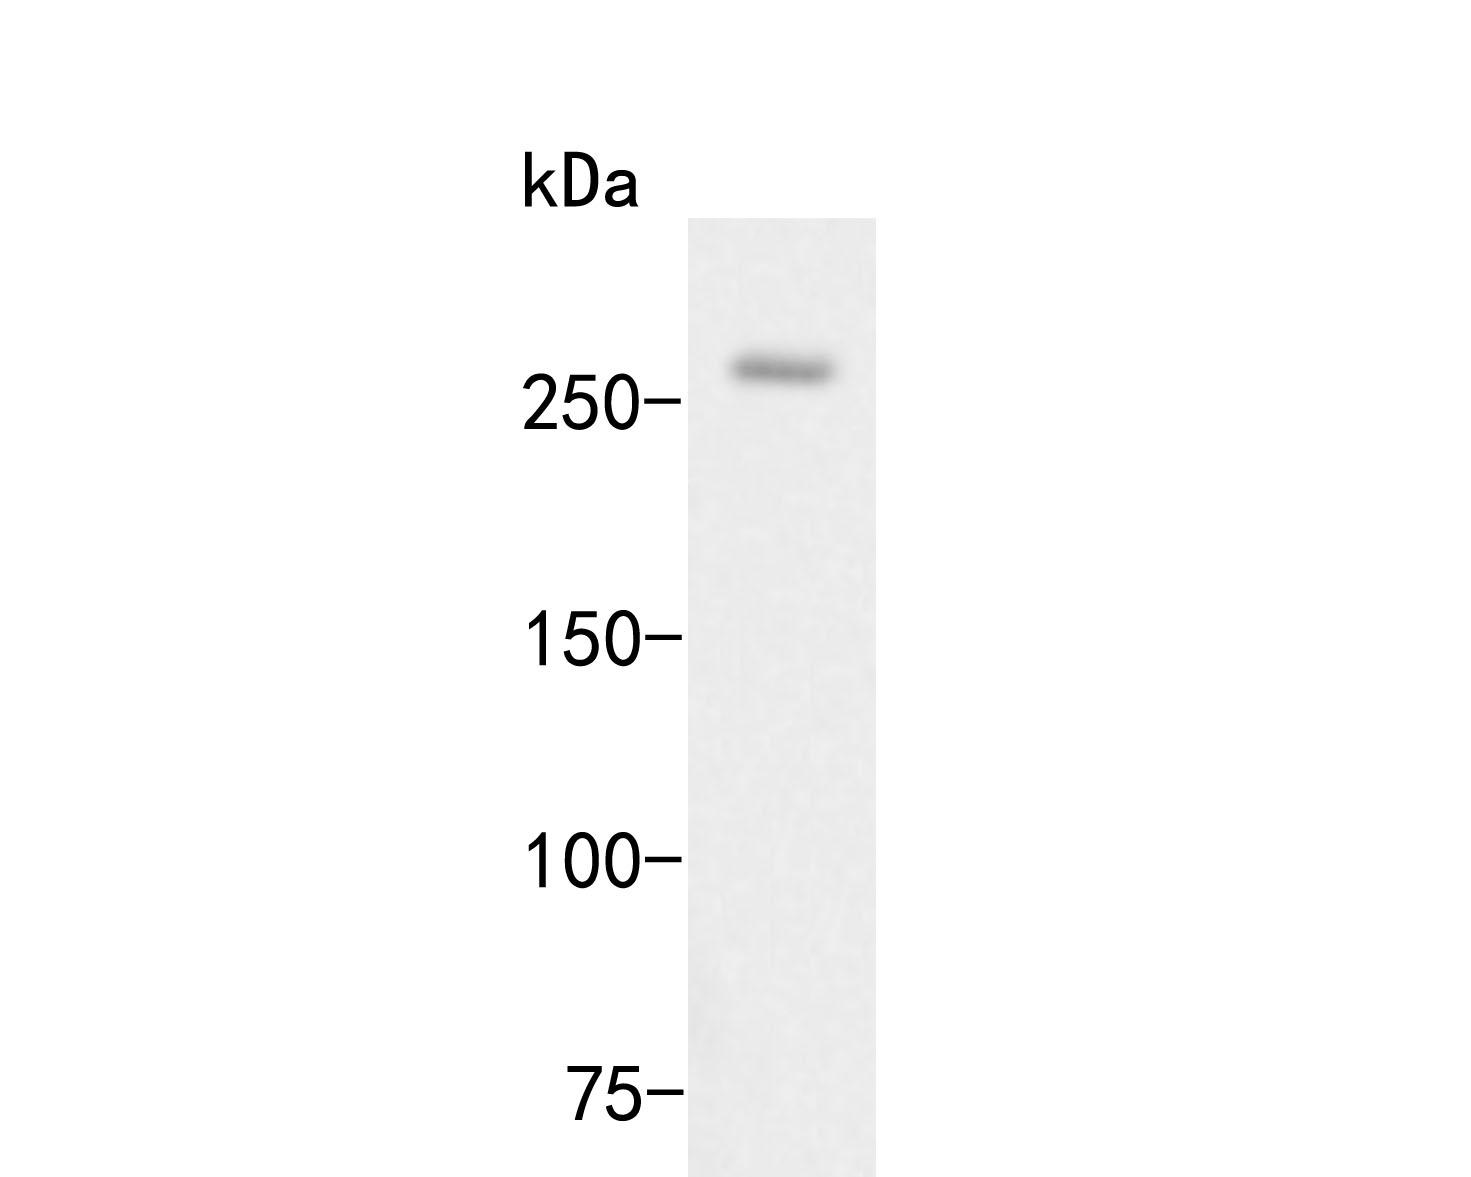 Western blot analysis of Myomegalin on NIH/3T3 cell lysates. Proteins were transferred to a PVDF membrane and blocked with 5% BSA in PBS for 1 hour at room temperature. The primary antibody (ER2001-16, 1/500) was used in 5% BSA at room temperature for 2 hours. Goat Anti-Rabbit IgG - HRP Secondary Antibody (HA1001) at 1:5,000 dilution was used for 1 hour at room temperature.